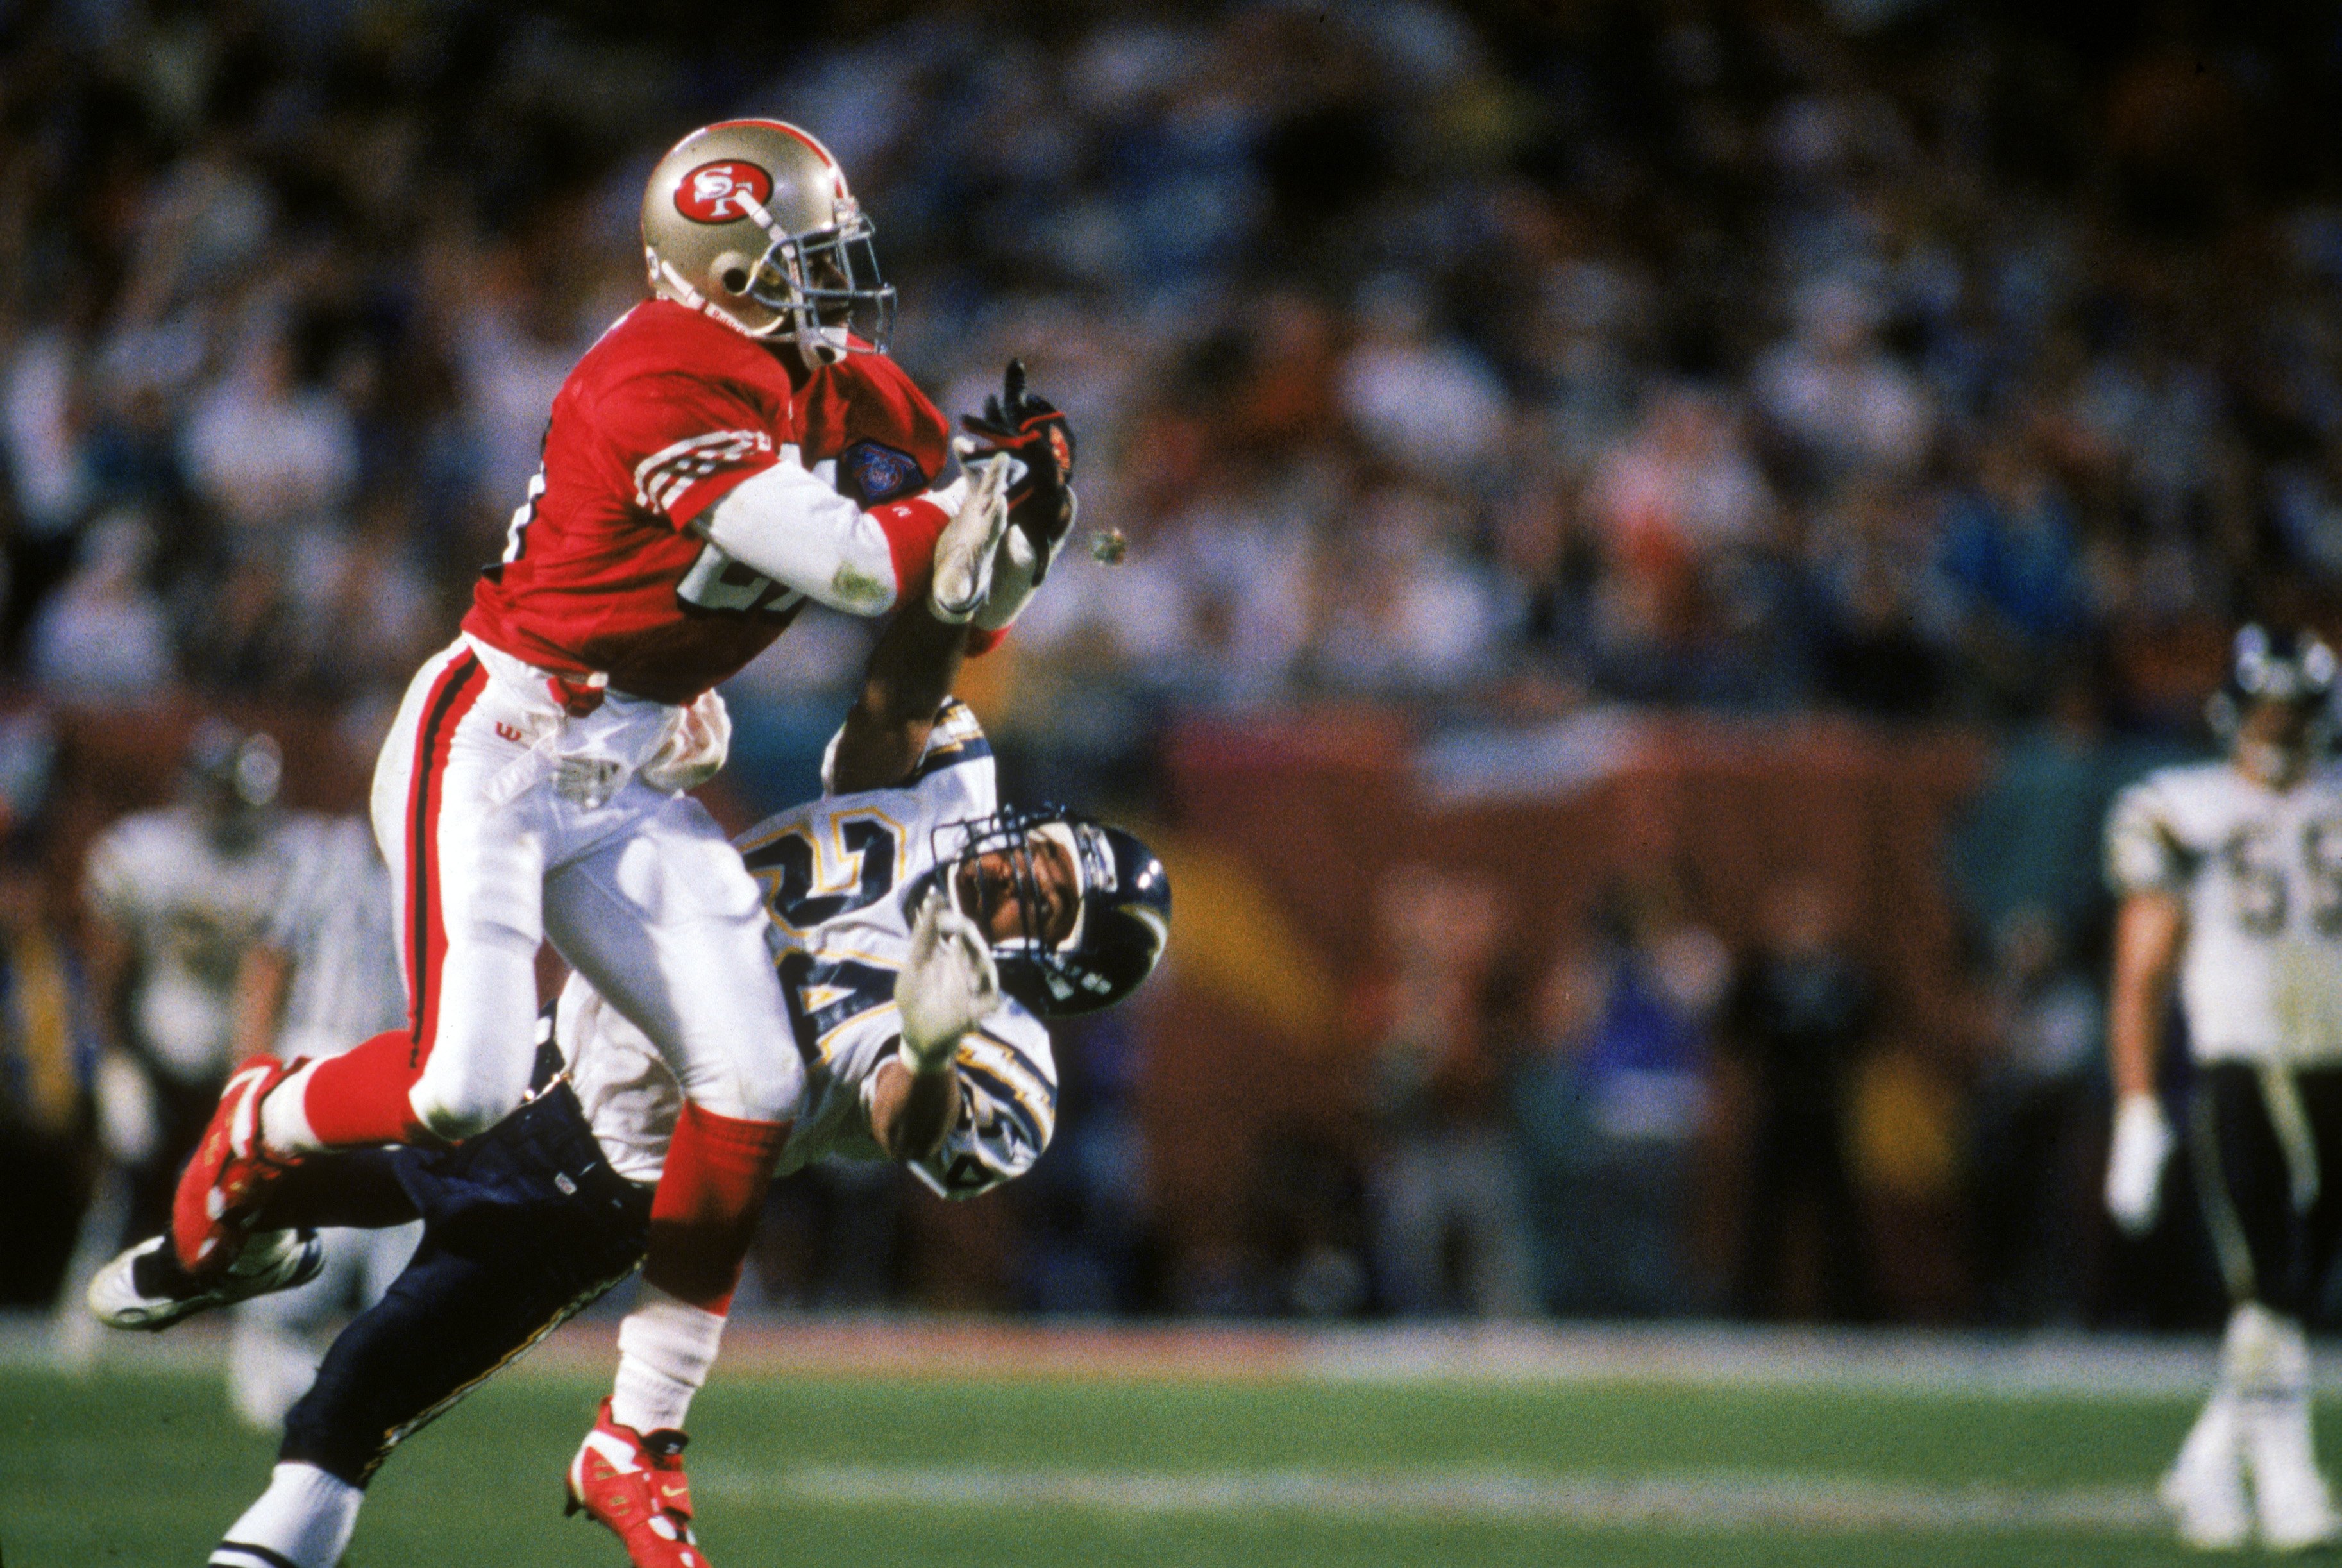 MIAMI - JANUARY 29:  Deion Sanders #21 of the San Francisco 49ers goes up to make a catch against Stanley Richard #24 of the San Diego Chargers during Super Bowl XXIX at Joe Robbie Stadium on January 29, 1995 in Miami, Florida. The 49ers won 49-26. (Photo